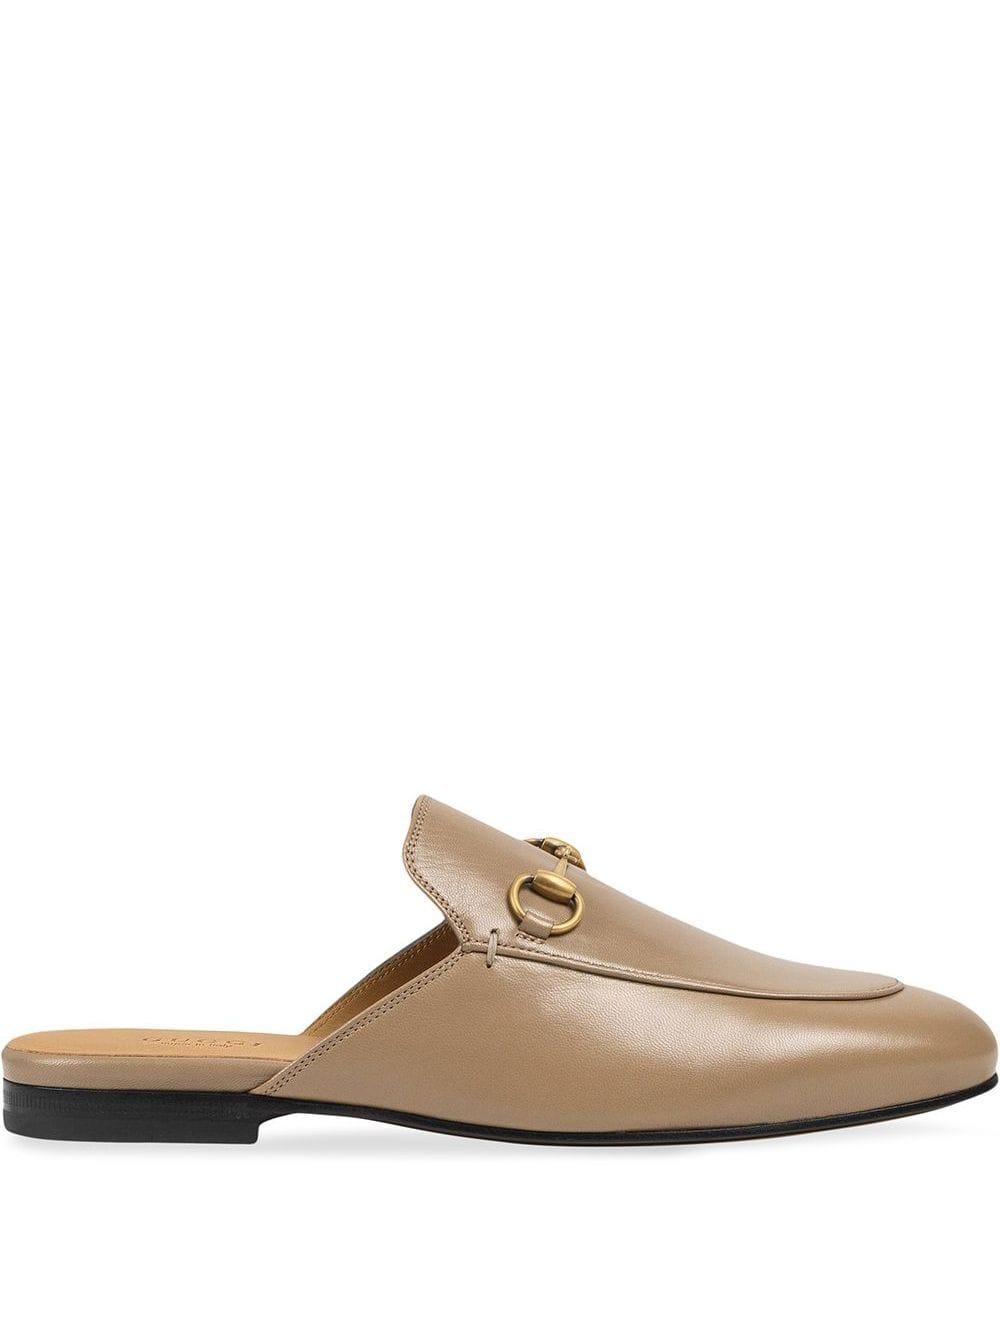 Gucci Women's Princetown Leather Slippers in Brown - Lyst